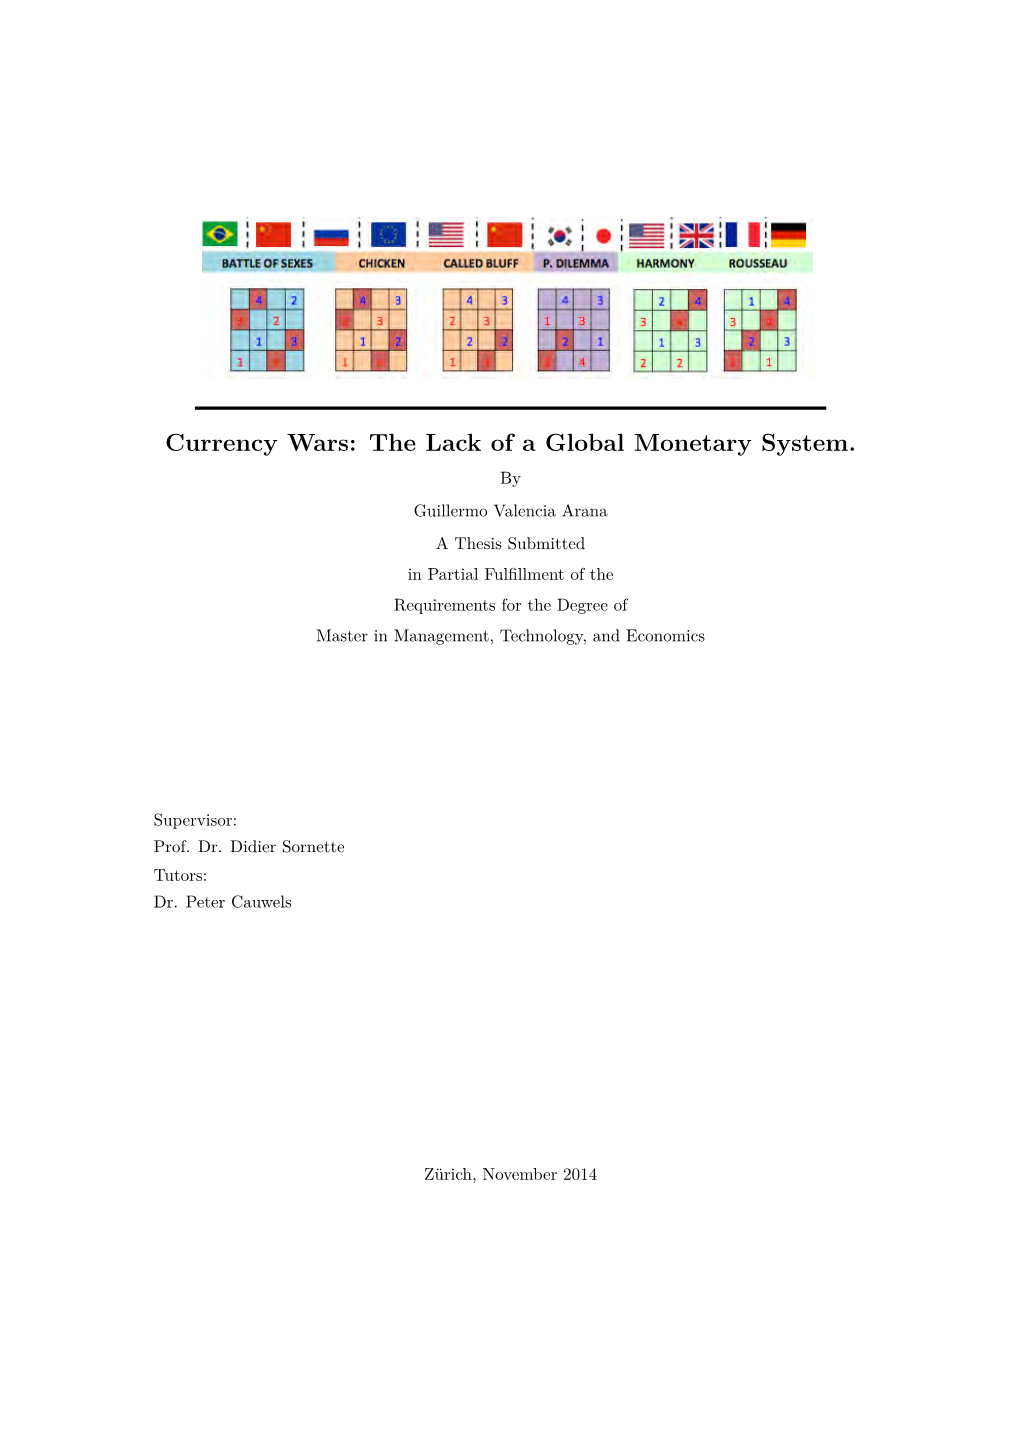 Currency Wars: the Lack of a Global Monetary System